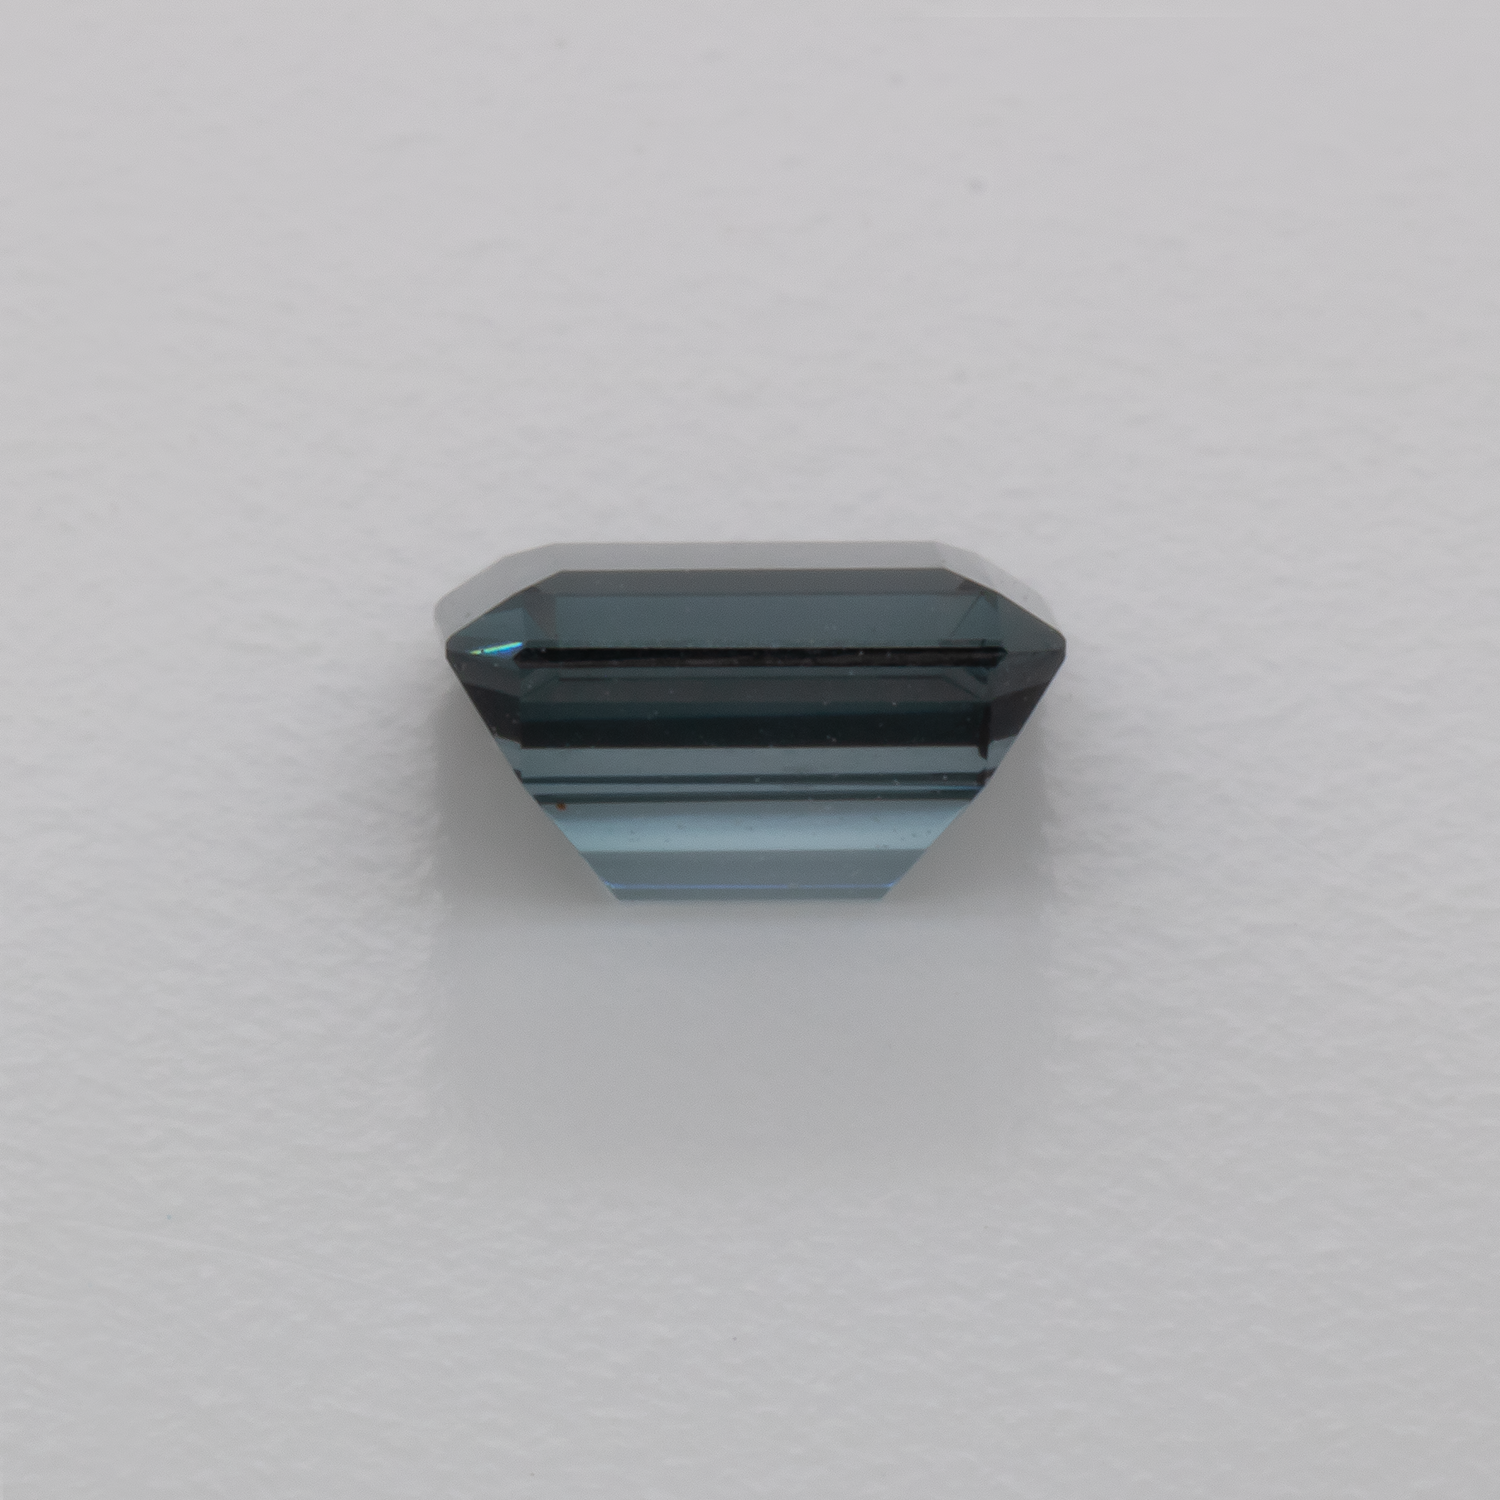 Spinell - grau, achteck, 5.6x4.5 mm, 0.75 cts, Nr. SP90054